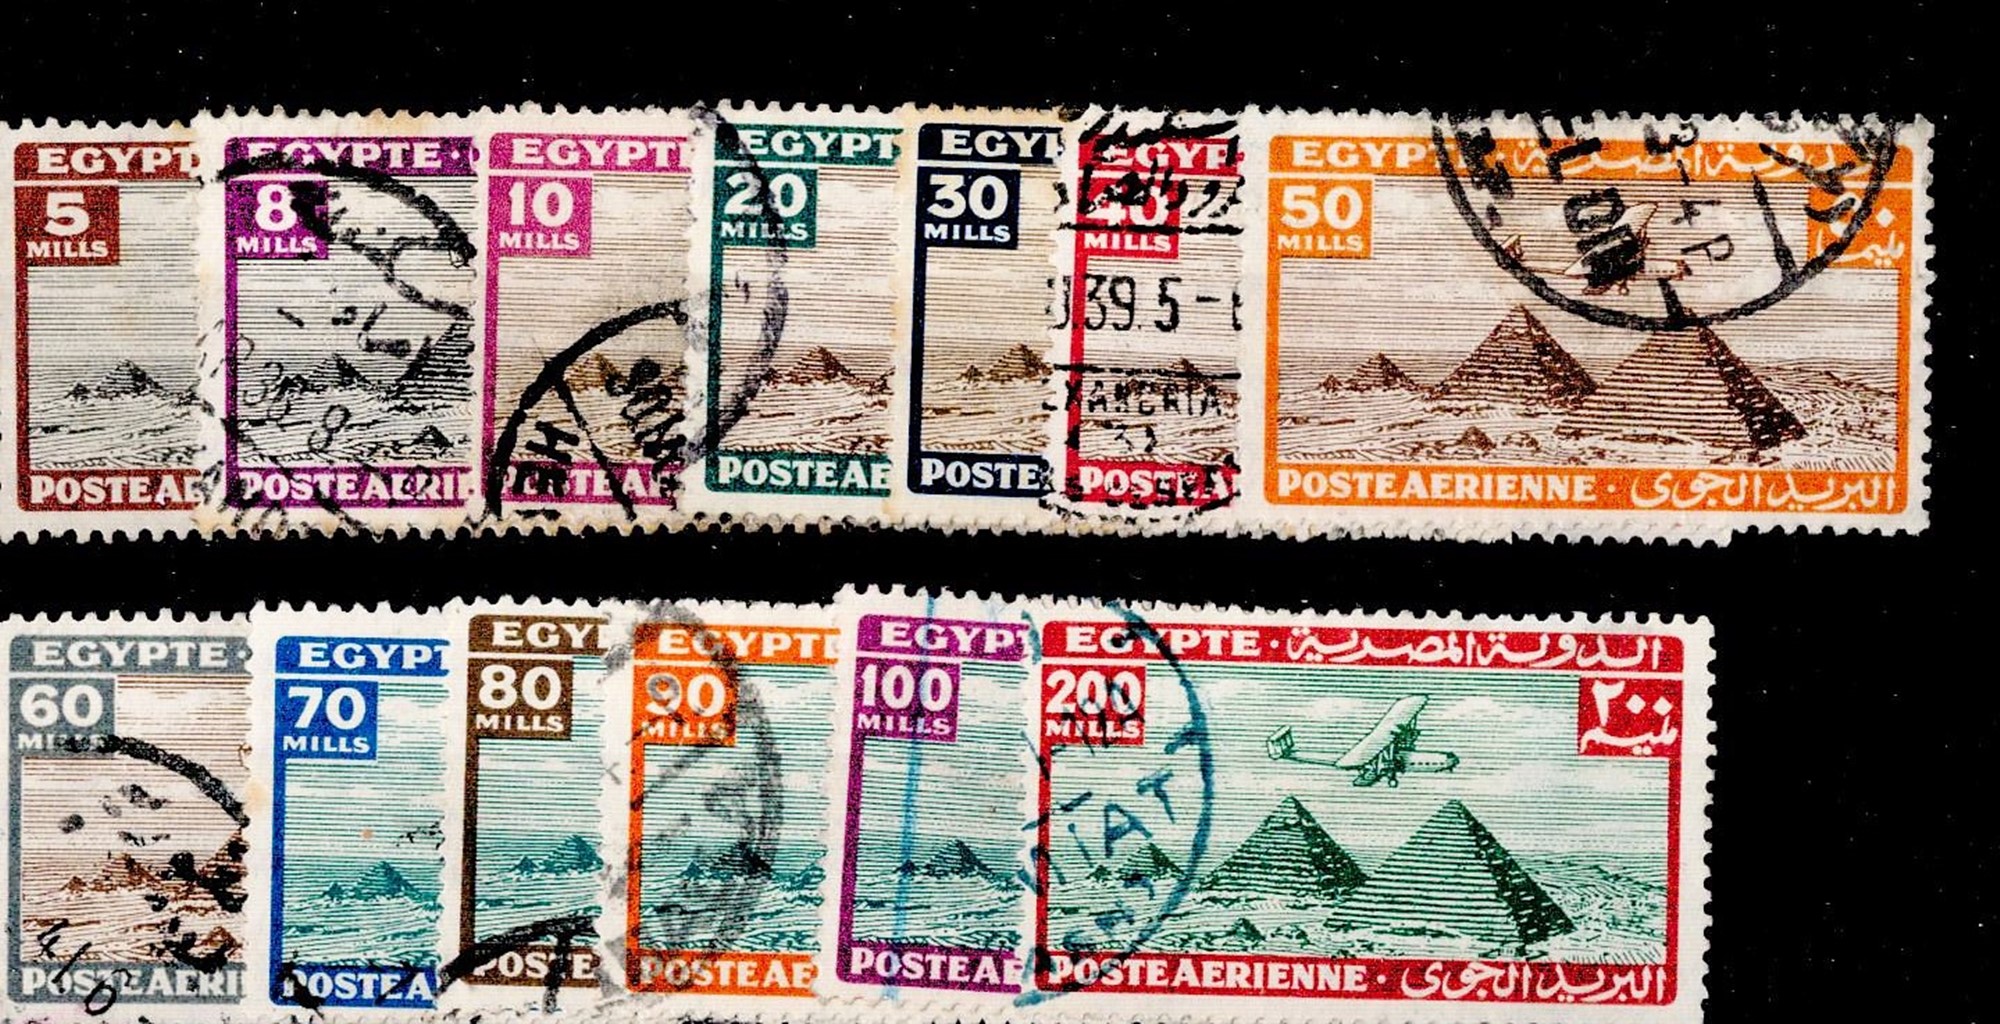 Egypt Stamps pre 1933 13 Stamps. Good condition. We combine postage on multiple winning lots and can - Image 2 of 2